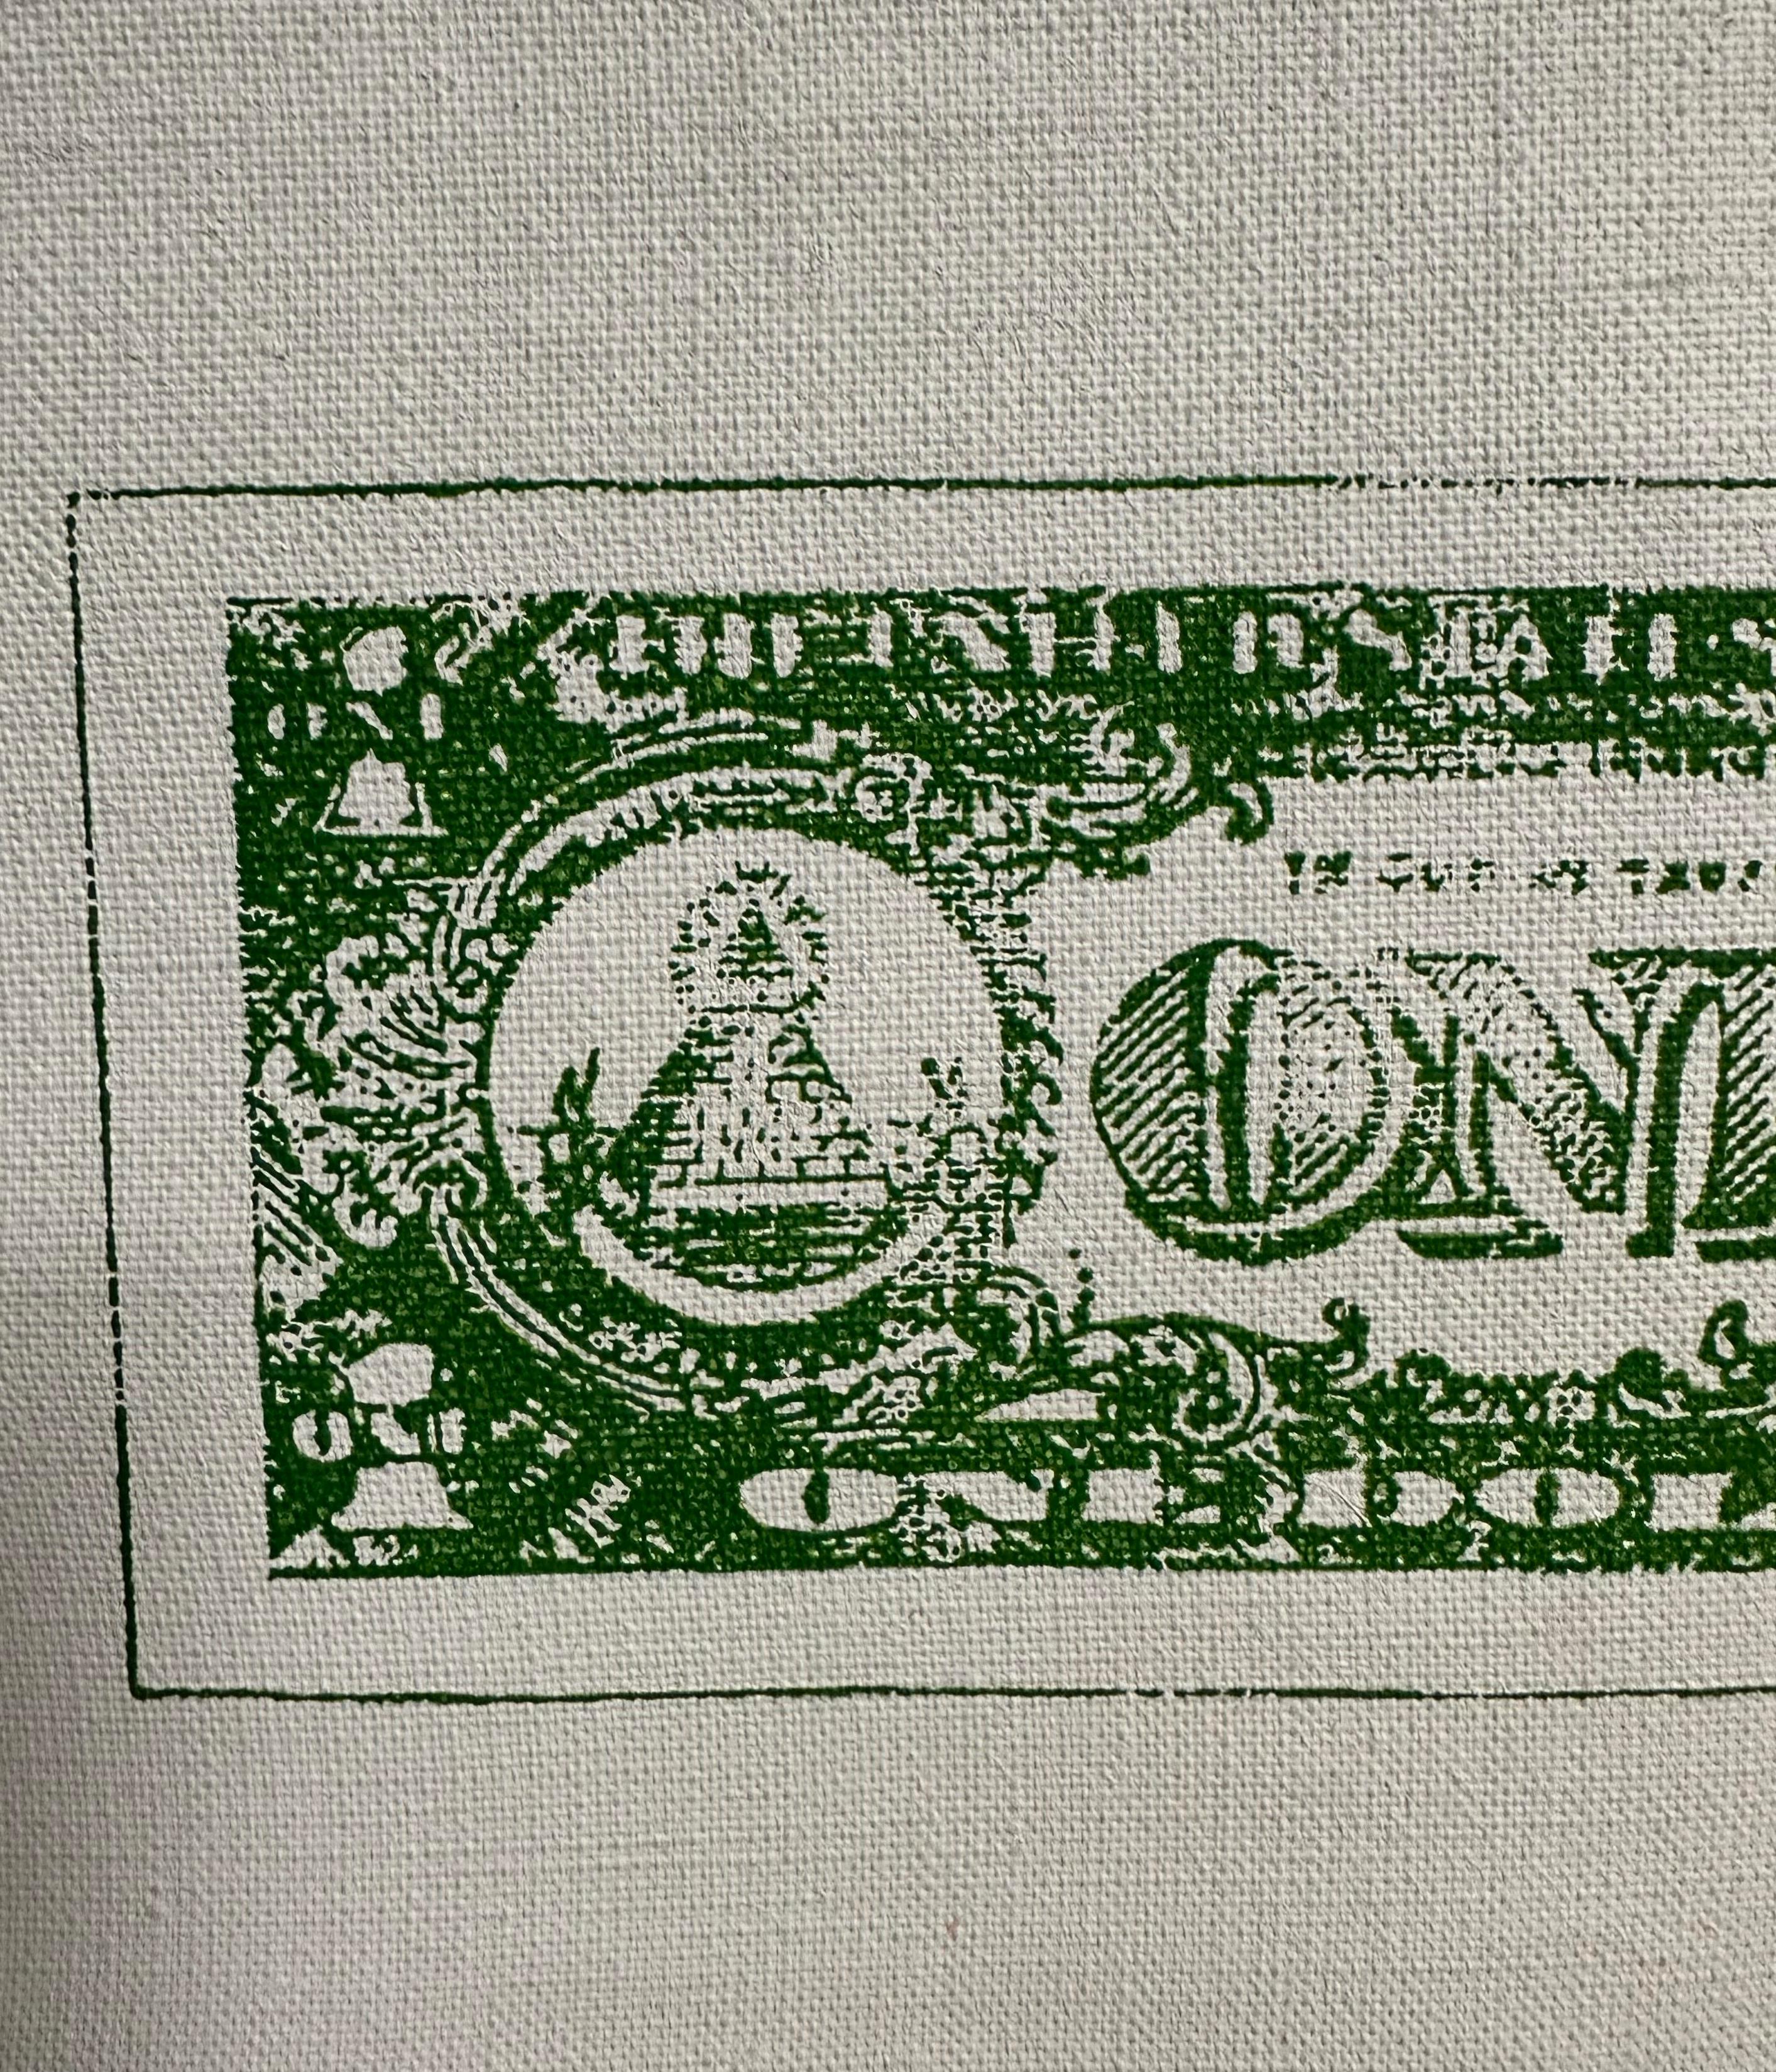 Denied Andy Warhol Dollar Bill Painting / Charles Lutz
silkscreen ink on linen with the Denied stamp of the Andy Warhol Art Authentication Board.
8 x 12 in. (20.3 x 30.5 cm.)
2008

Lutz's 2007 ''Warhol Denied'' series gained international attention